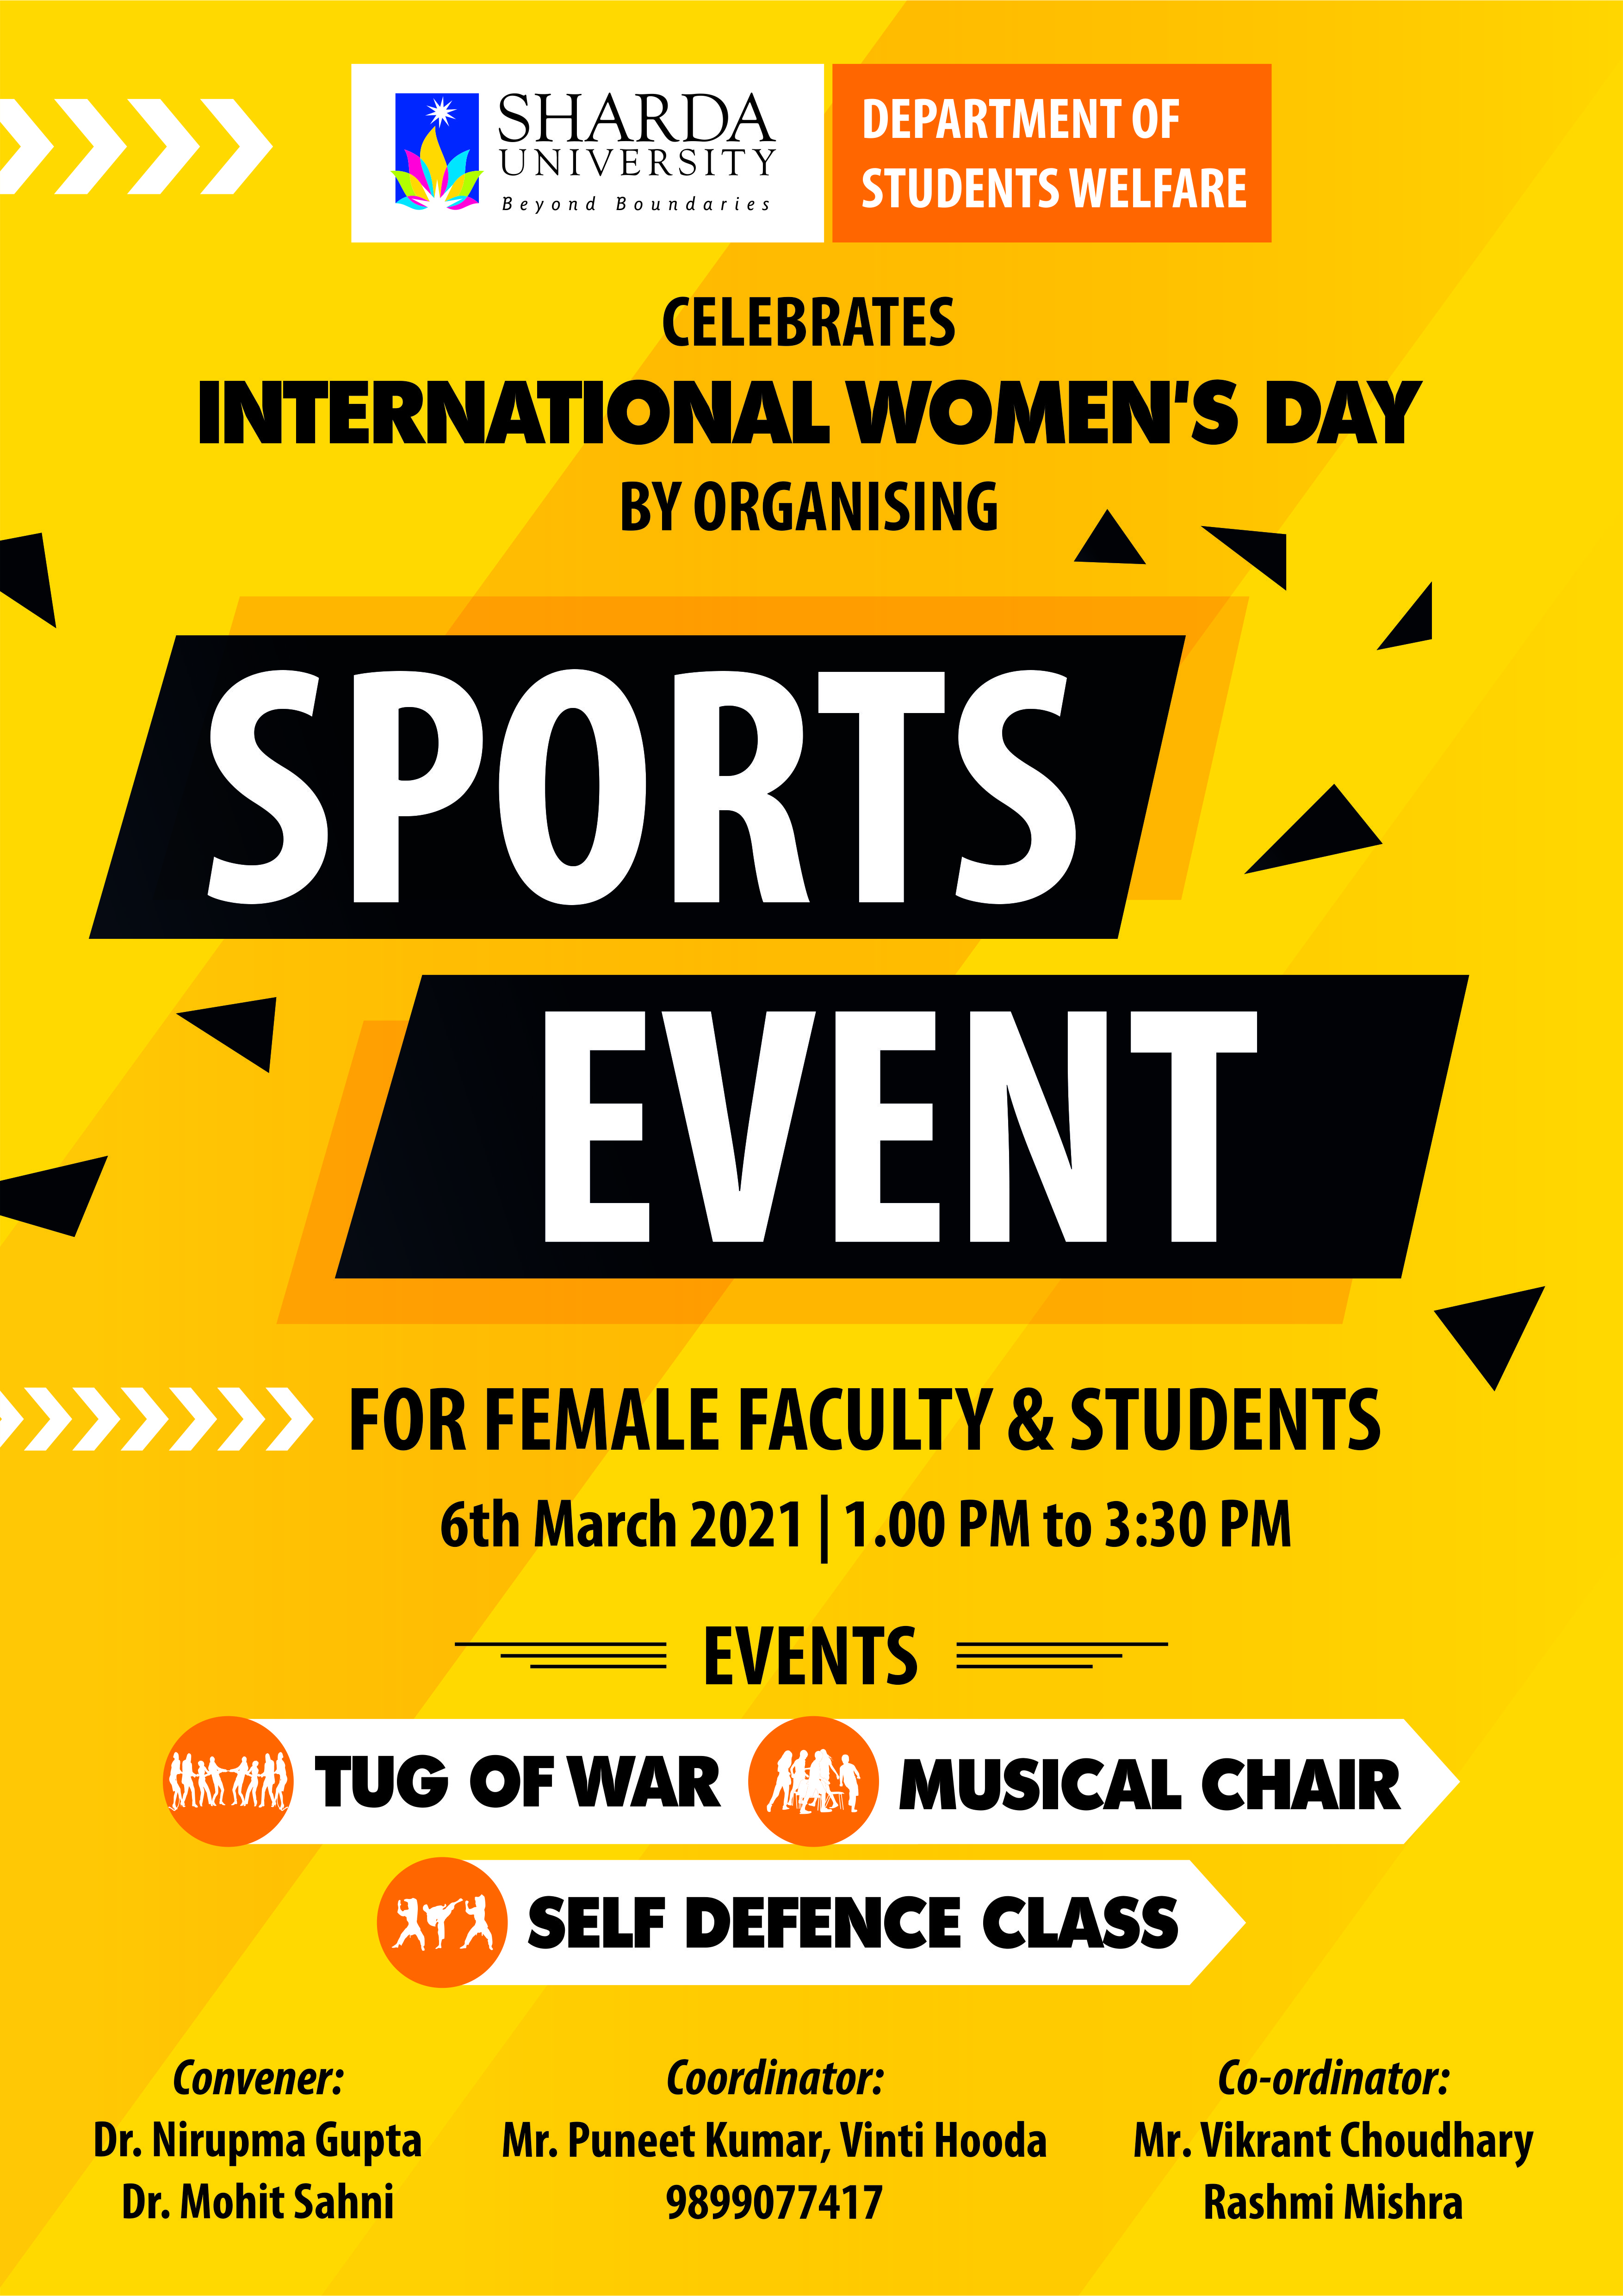 Sports Event & Self-Defence Training for Women Faculty/ staff & Female Students